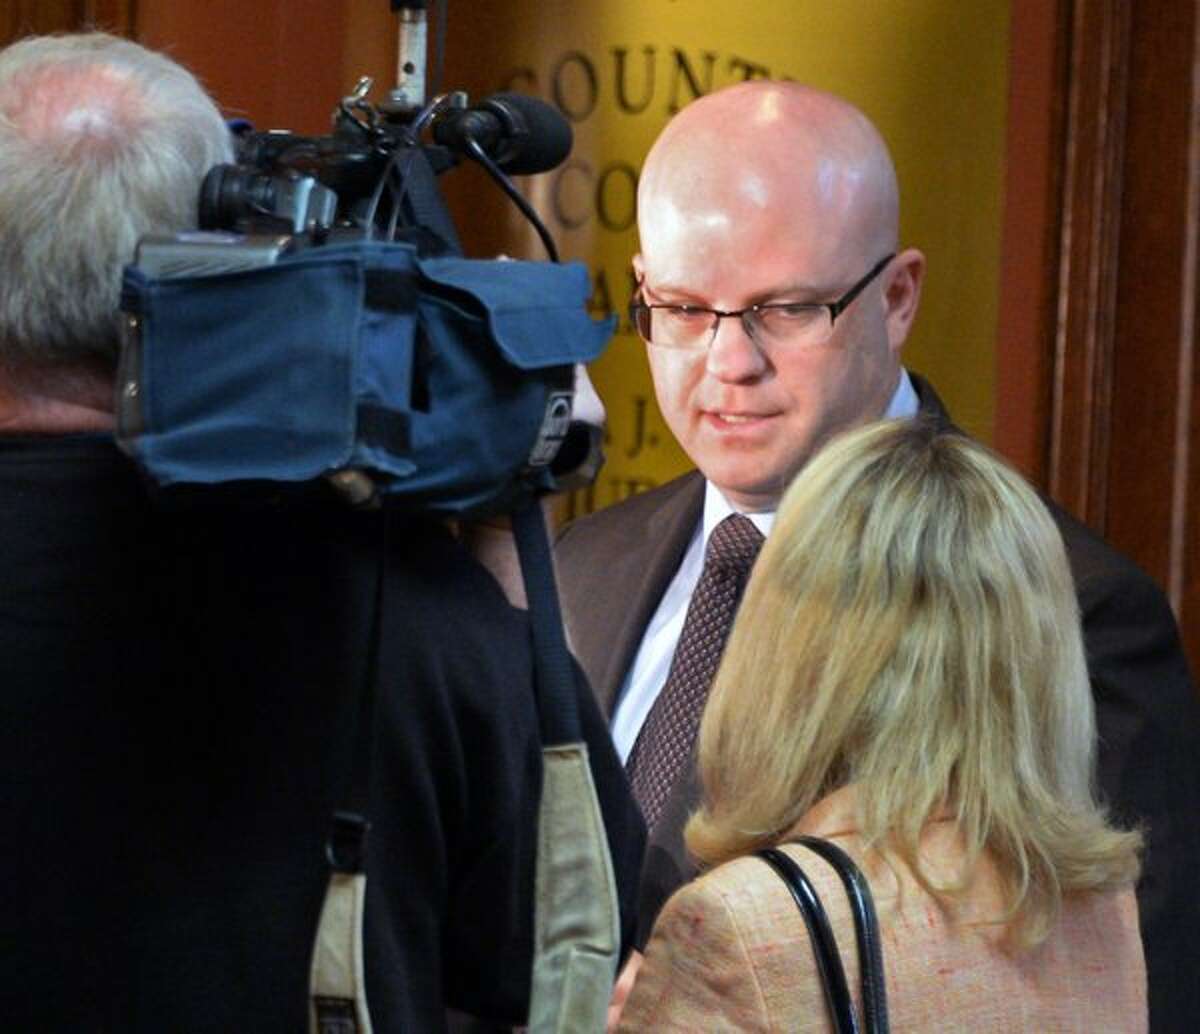 Rensseleaer County District Attorney Joel Abelove discusses the conviction of Gabriel Vega, who was convicted of manslaughter, arson and abortion in connection with April 2014 killing of Vanessa Milligan, 19. (John Carl D'Annibale / Times Union)